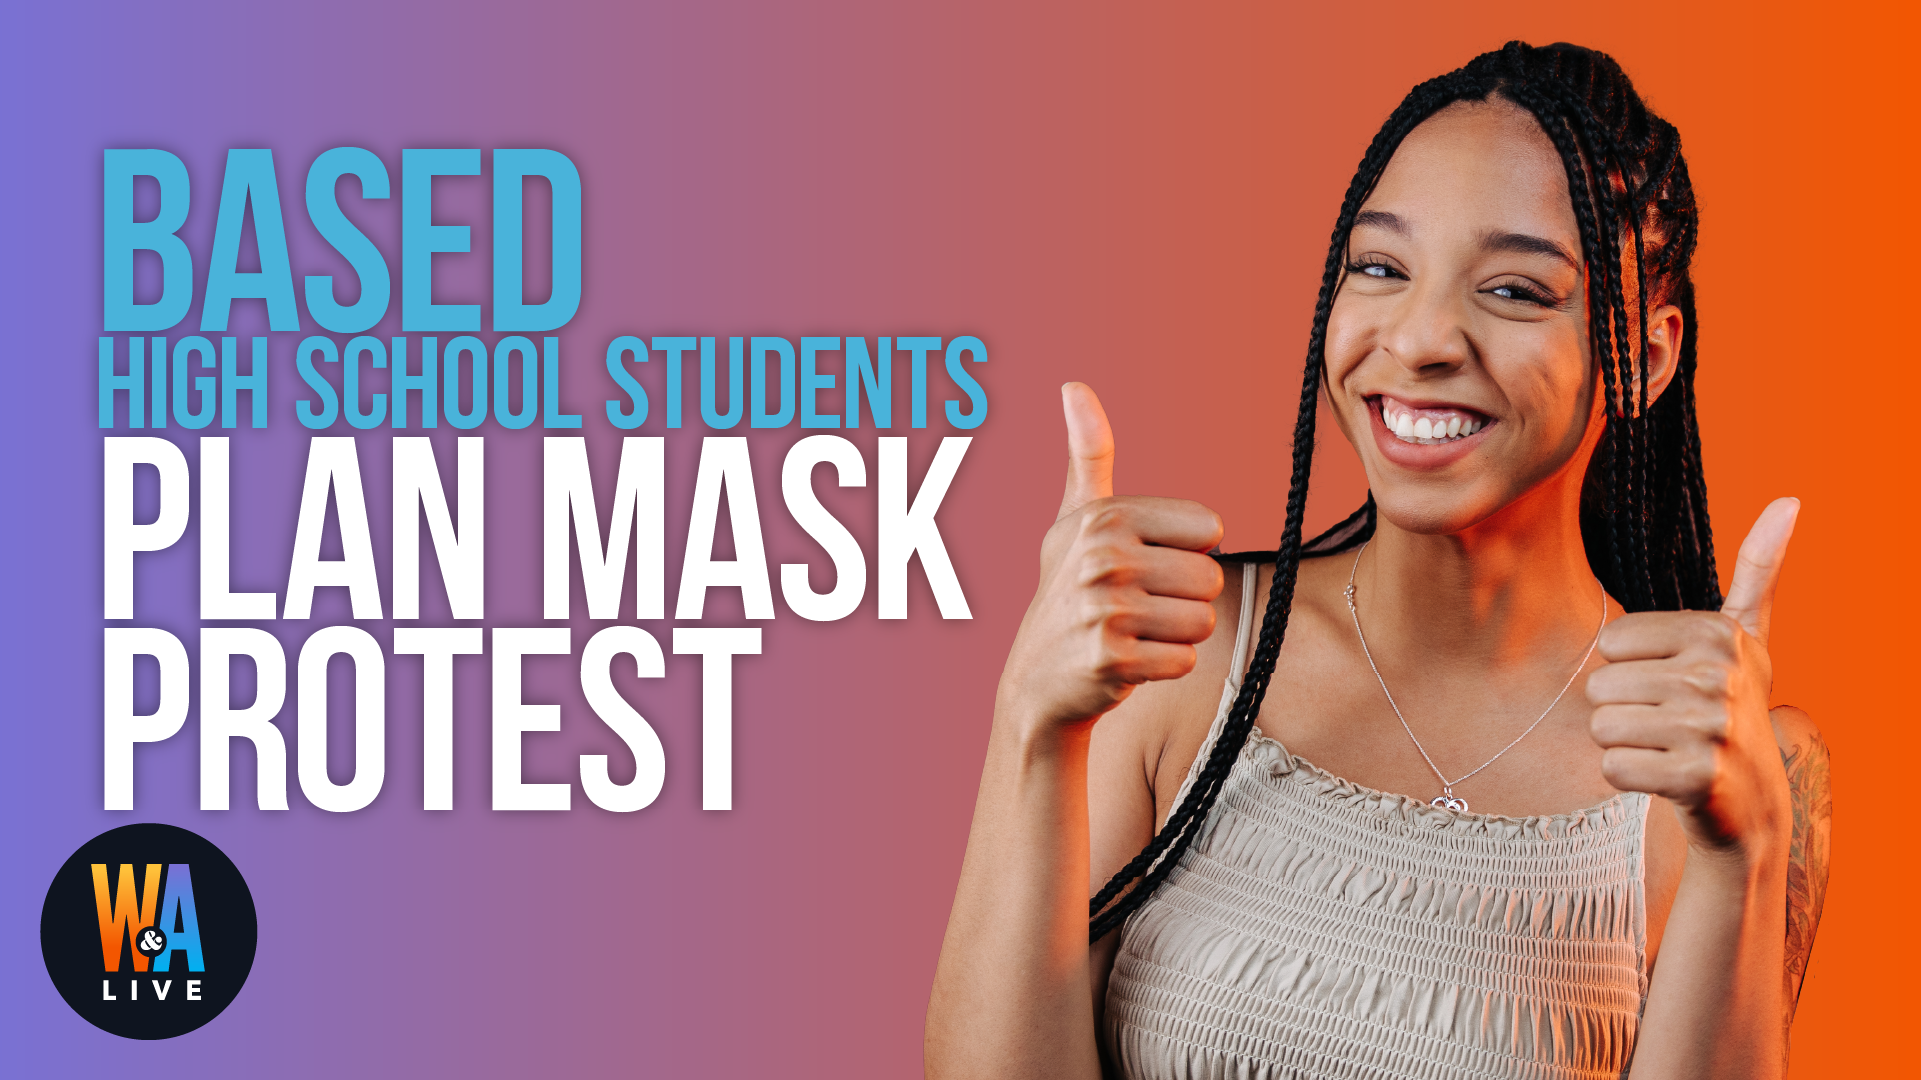 Based High School Students Plan Mask Protest